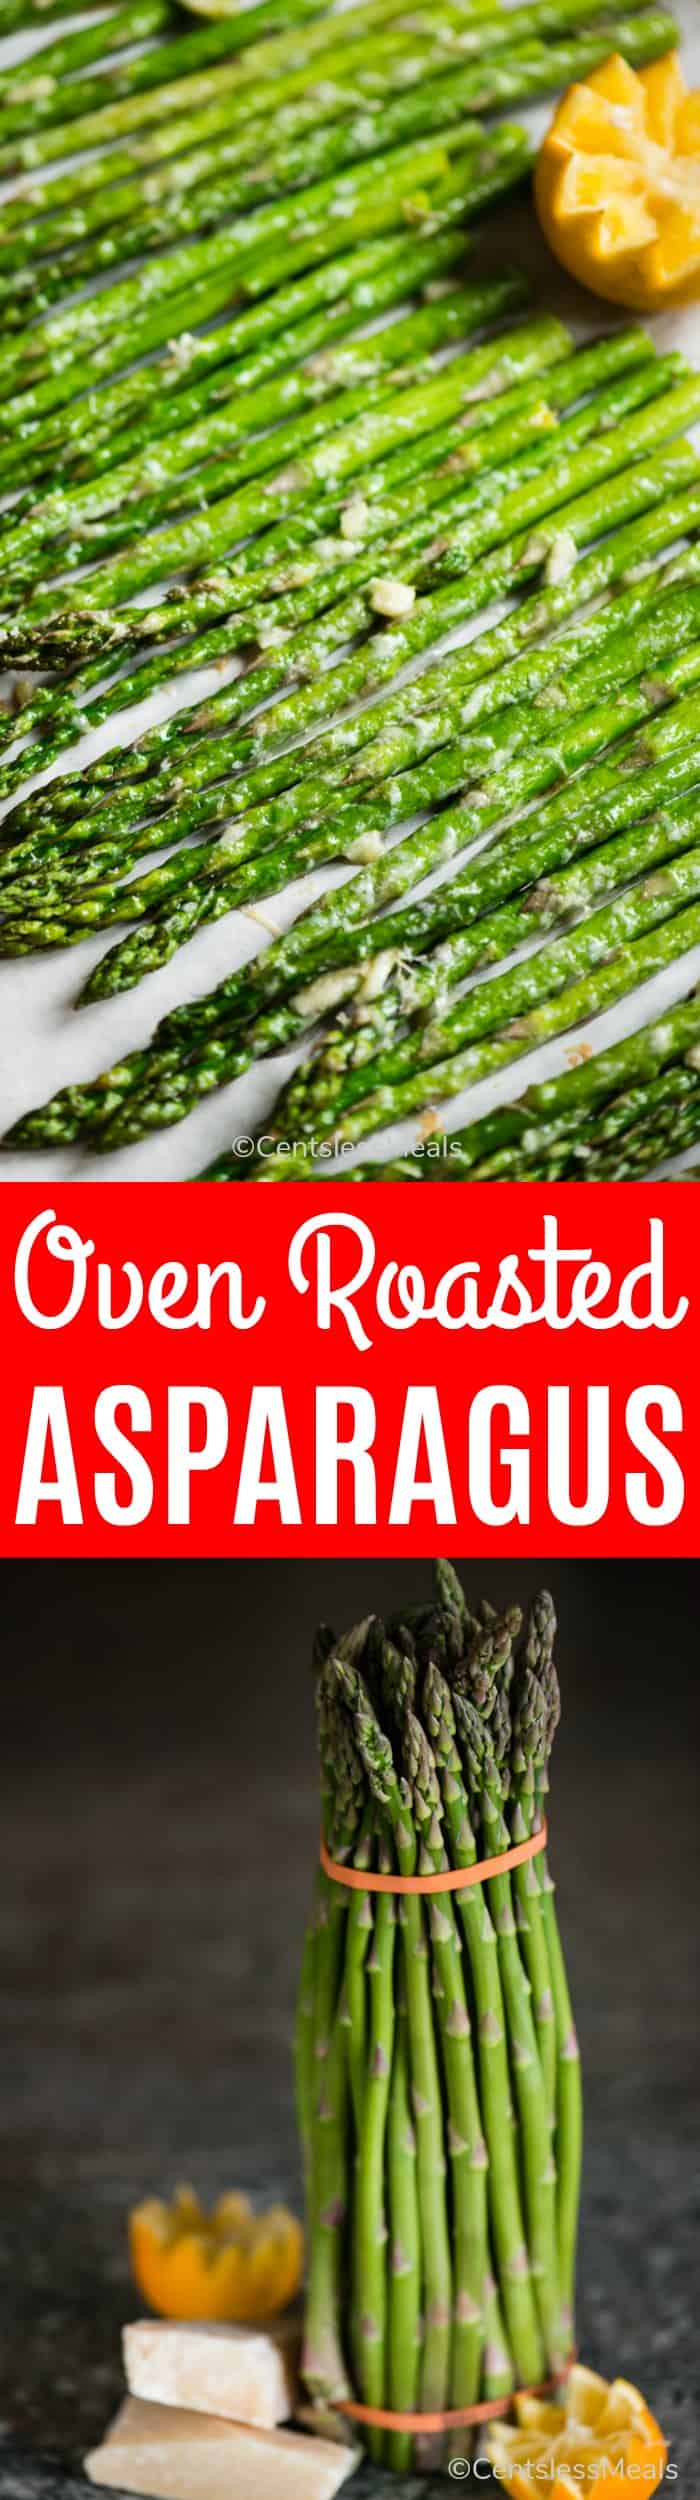 Oven roasted asparagus lined together on parchment paper and a asparagus standing upright in a bundle, underneath title